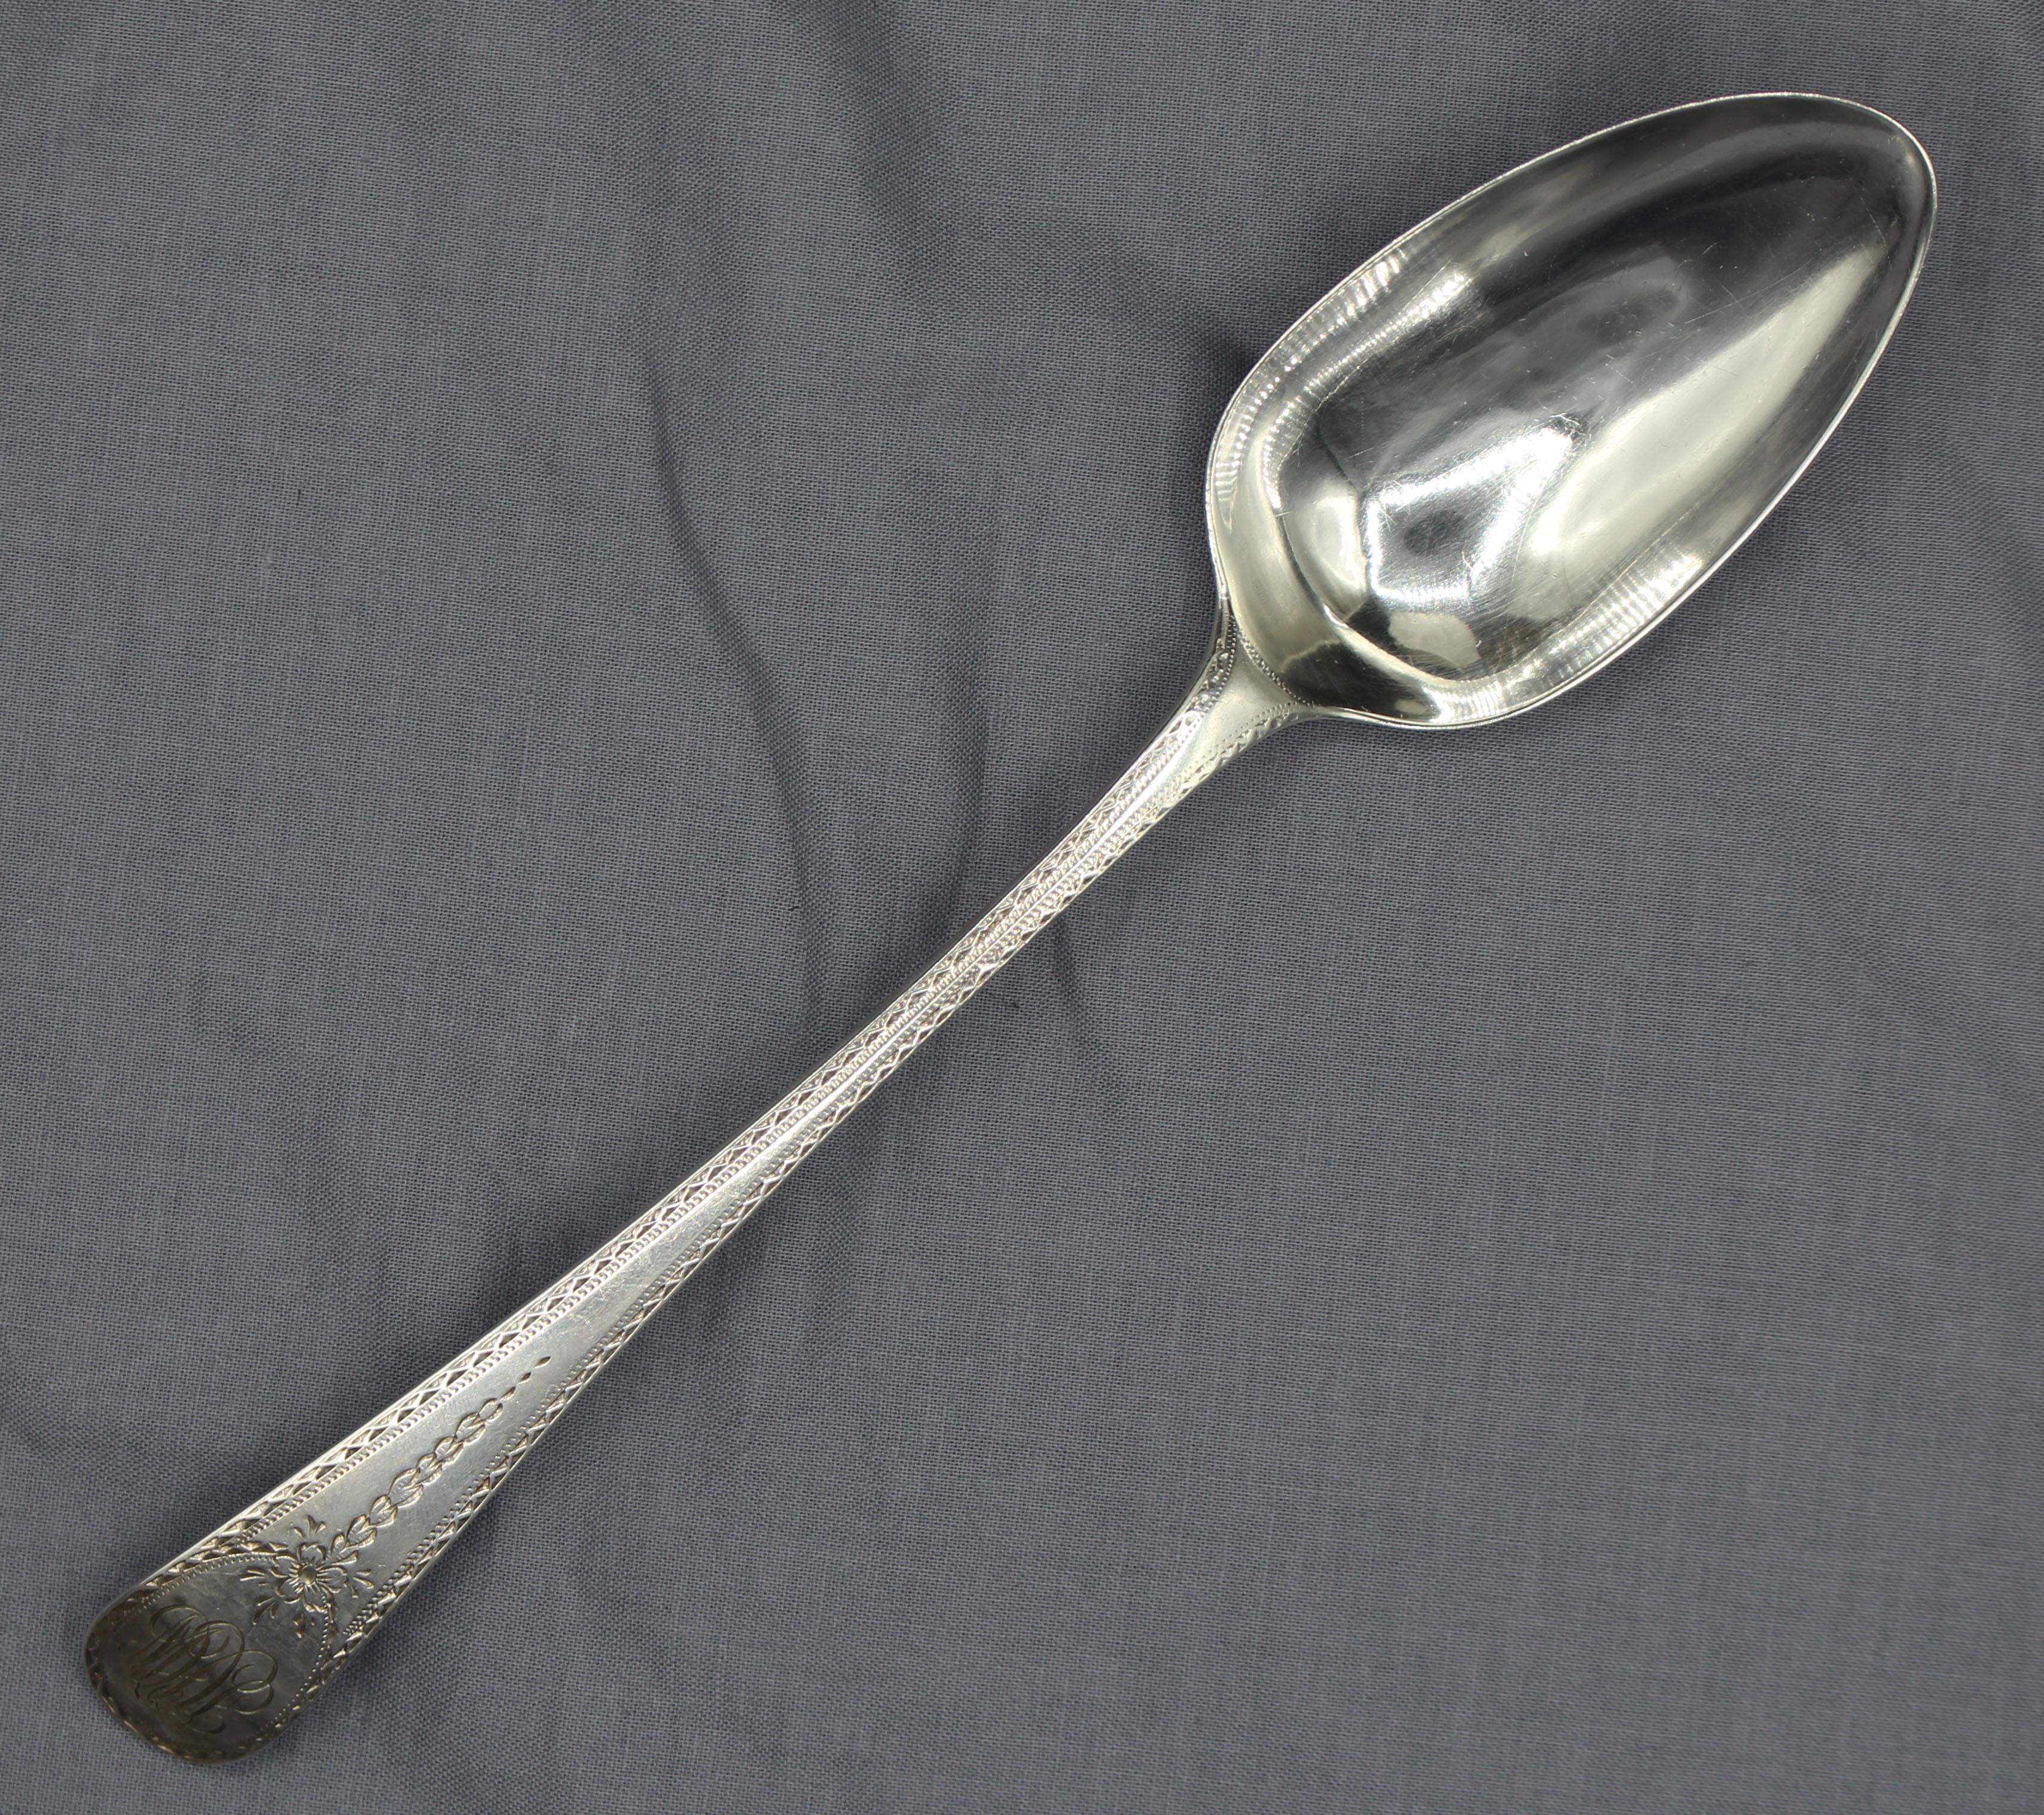 London, 1797, Old English engraved pattern large soup or table spoon, sterling silver, by George Brasier. Later monogram. 1.75 troy oz. Measures: 8 5/8